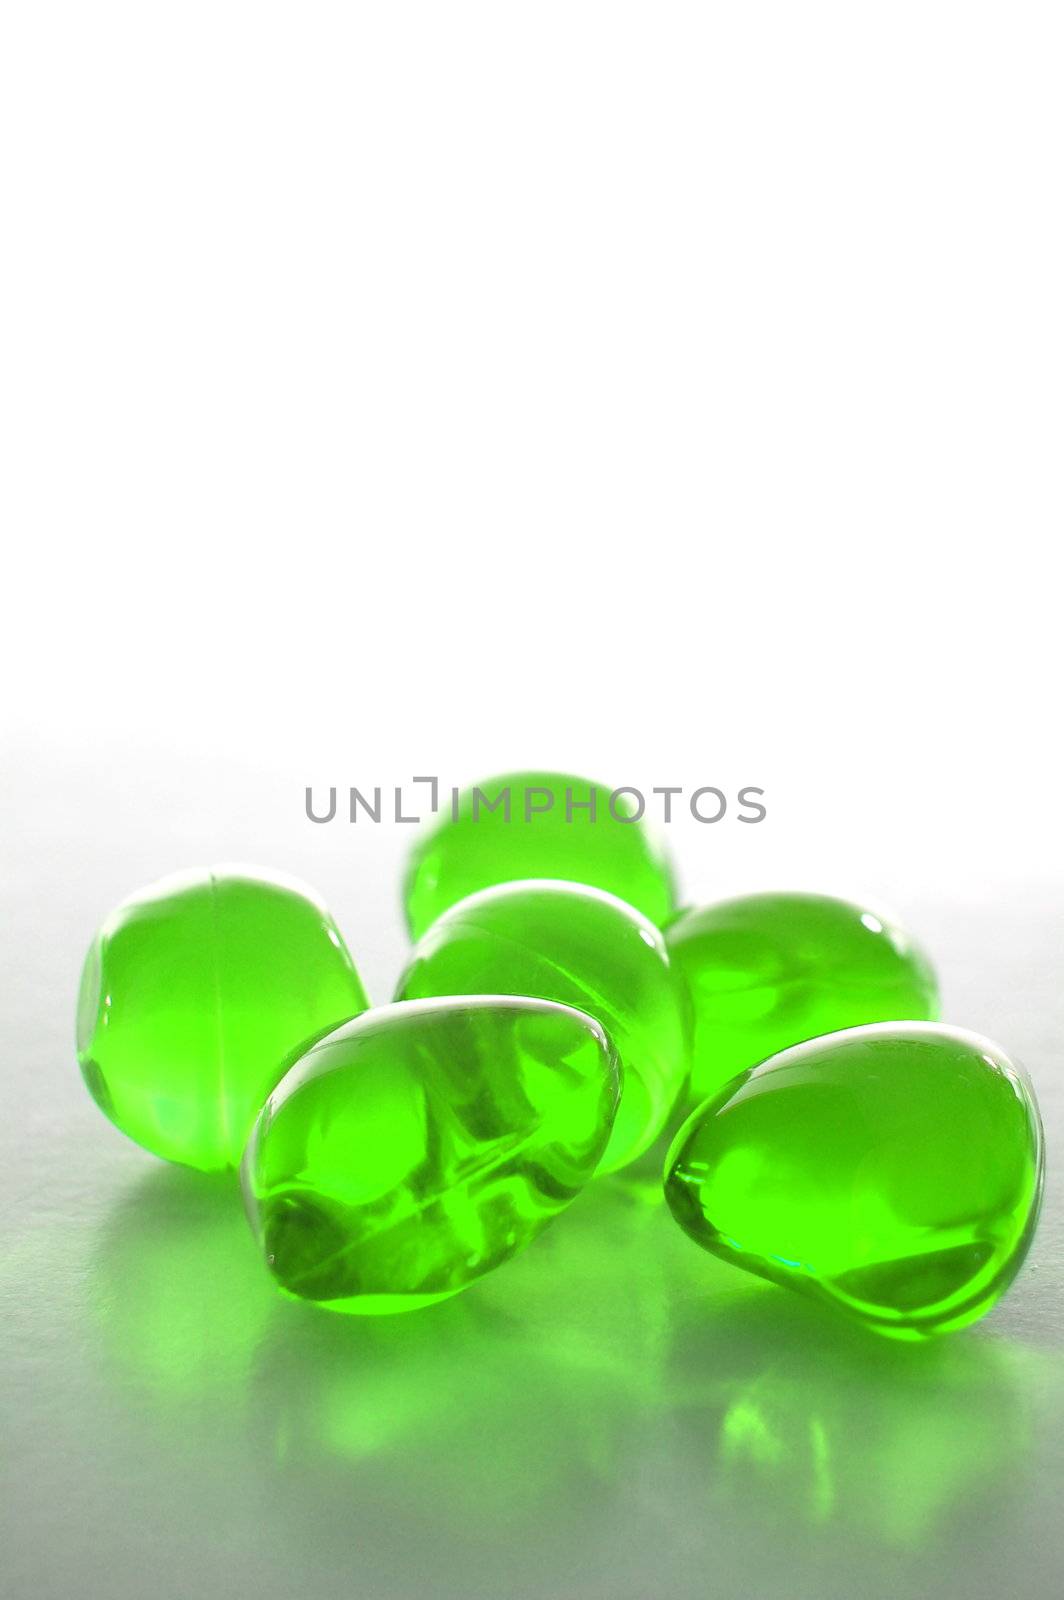 abstract pill background showing concept of pharmaceutical industry